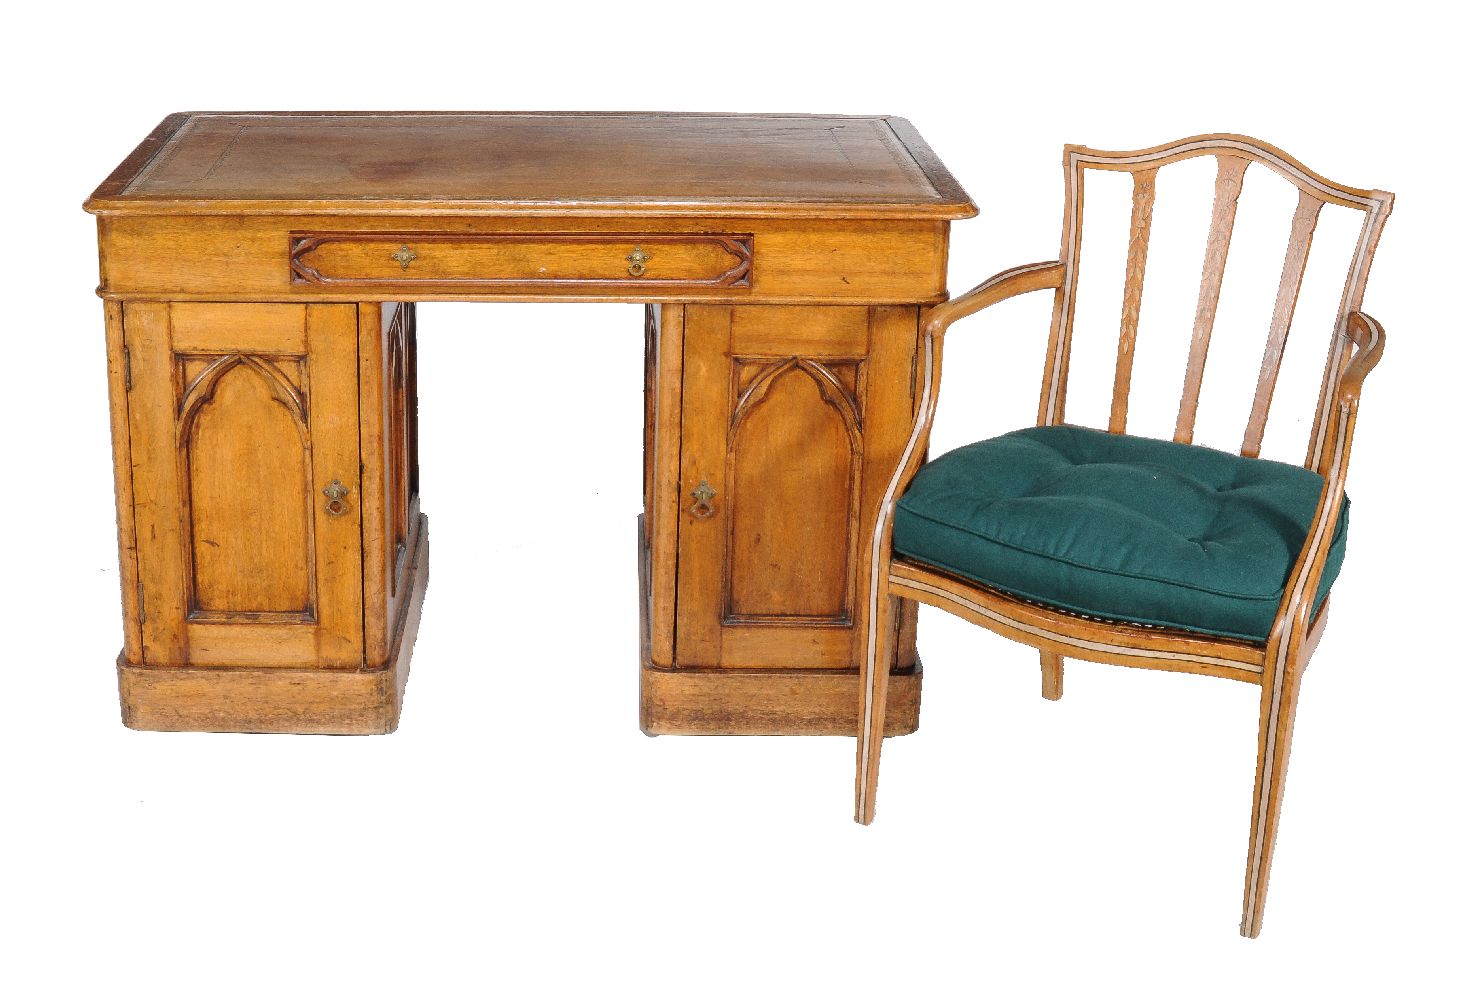 An oak twin pedestal desk in Gothic Revival style, circa 1860 and later, 70cm high, 121cm wide, 69cm